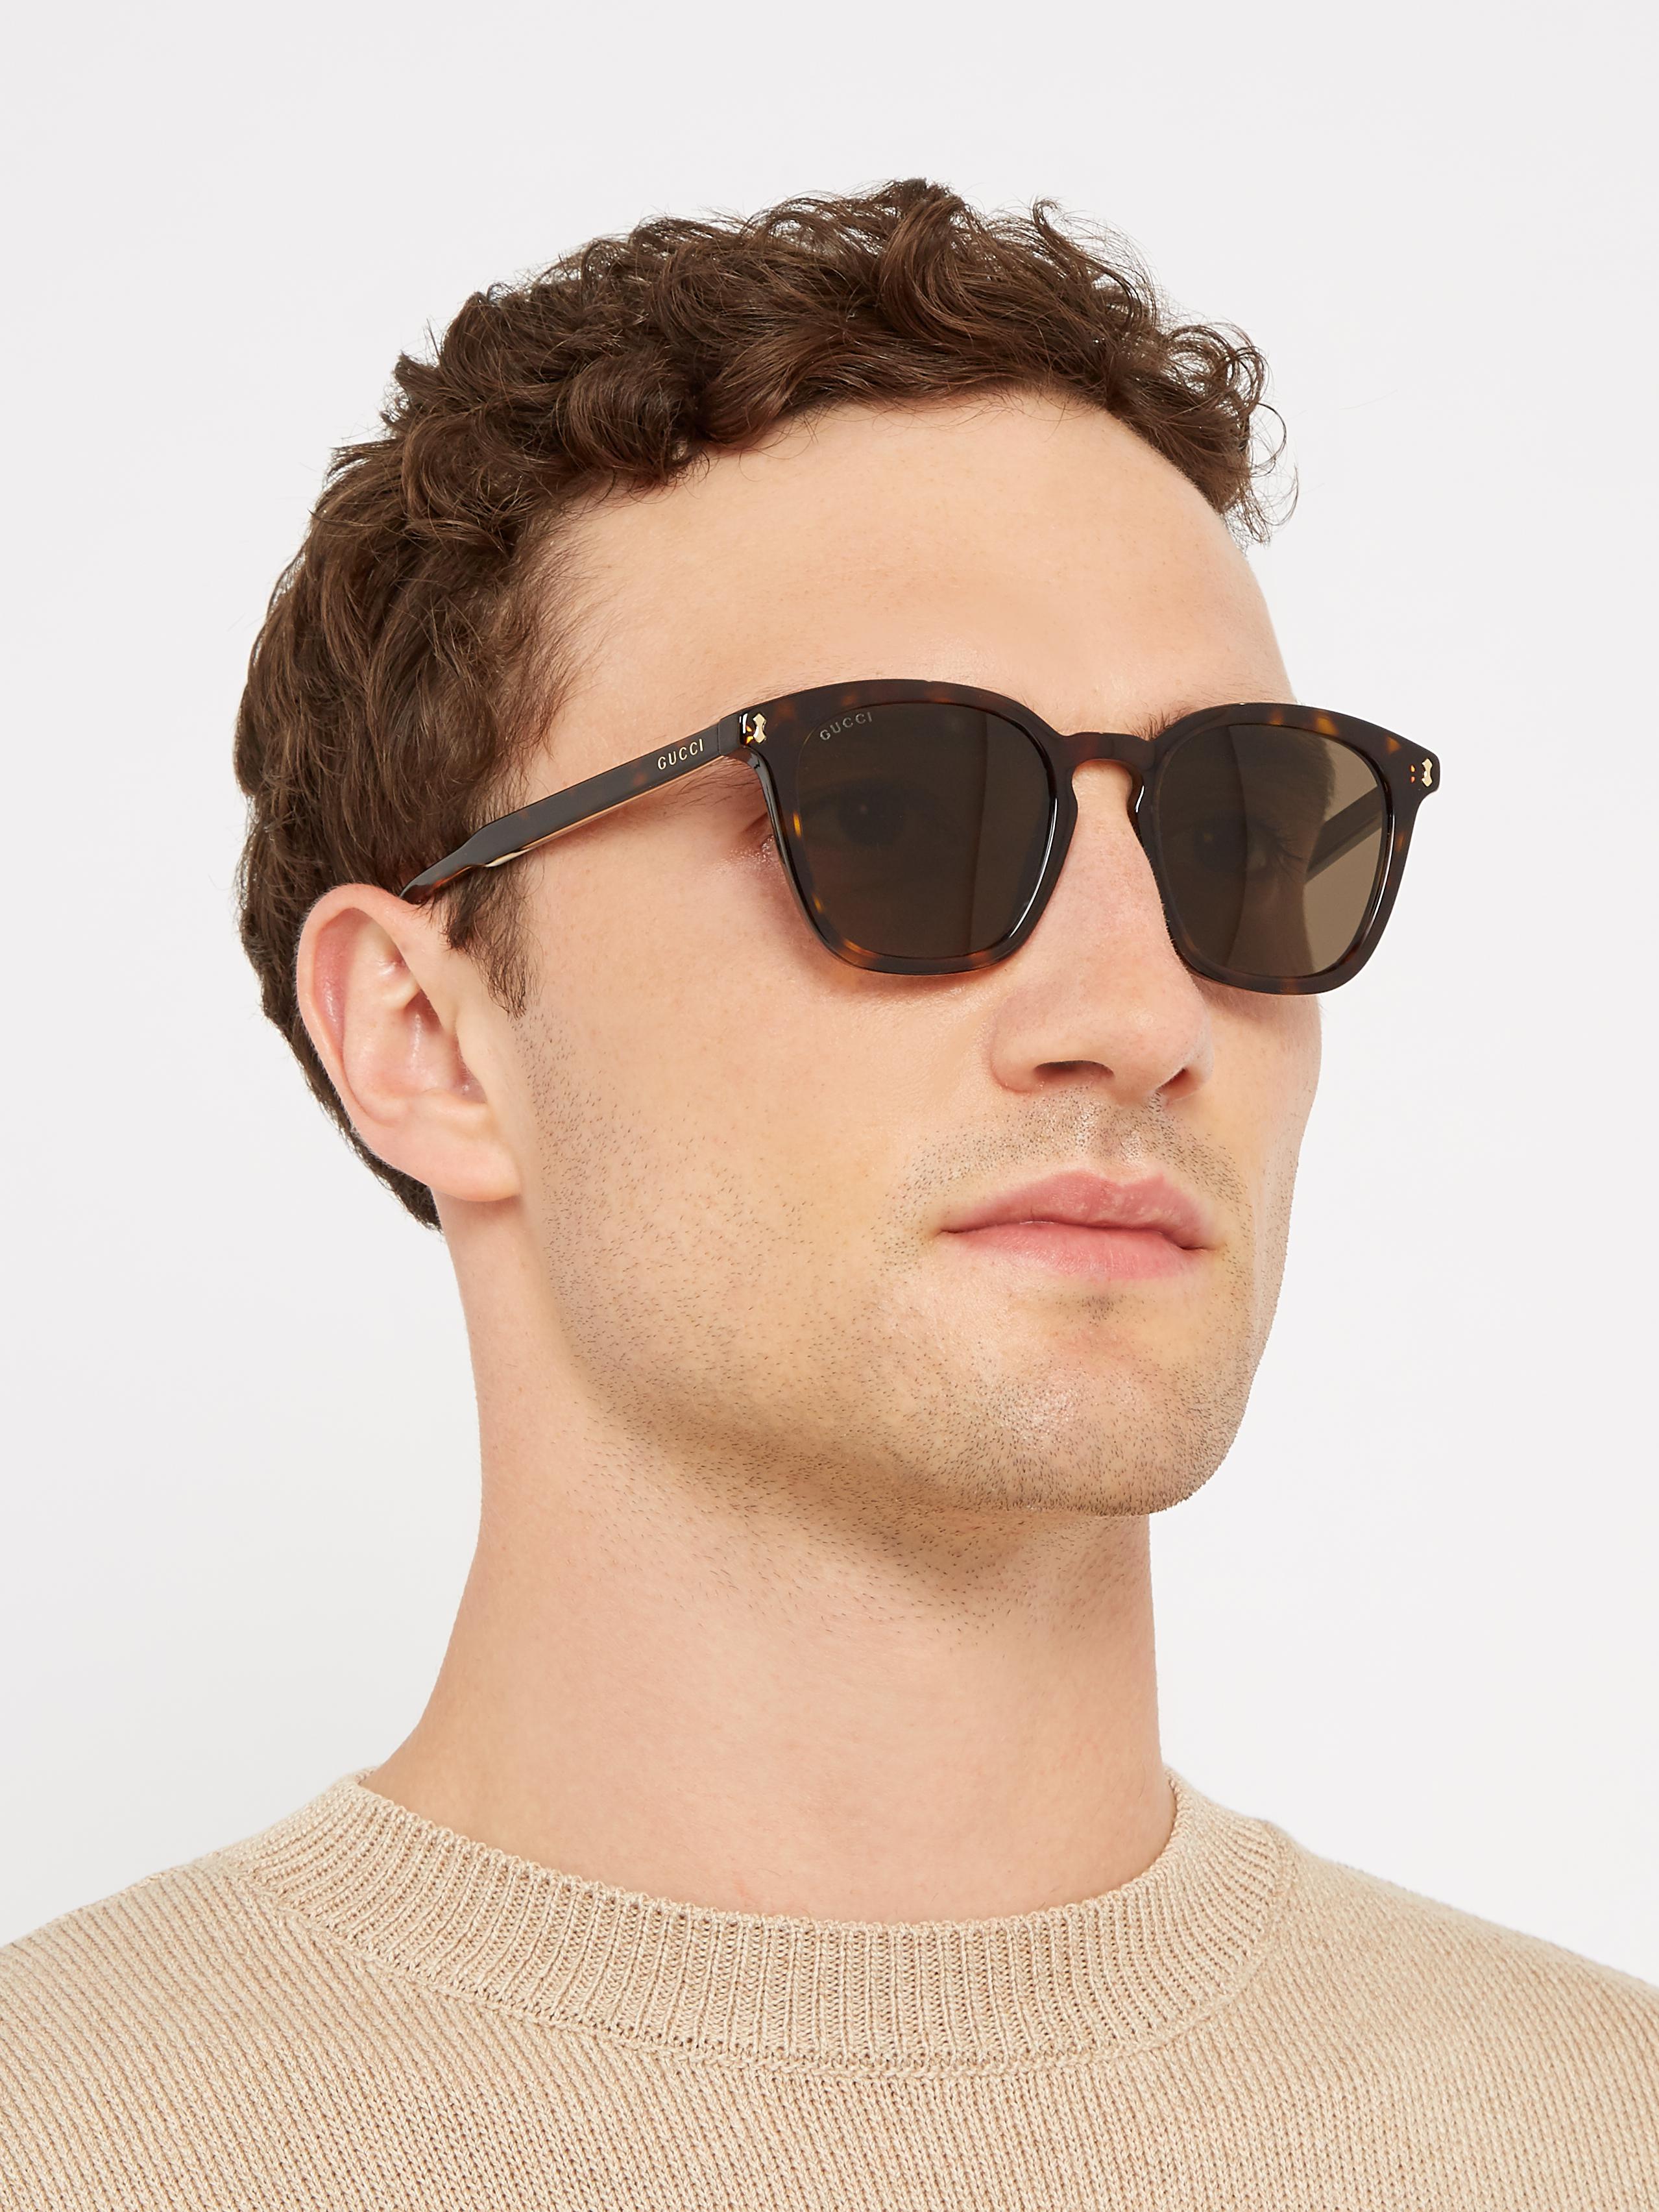 Gucci Square-frame Acetate Sunglasses in Brown for Men - Lyst